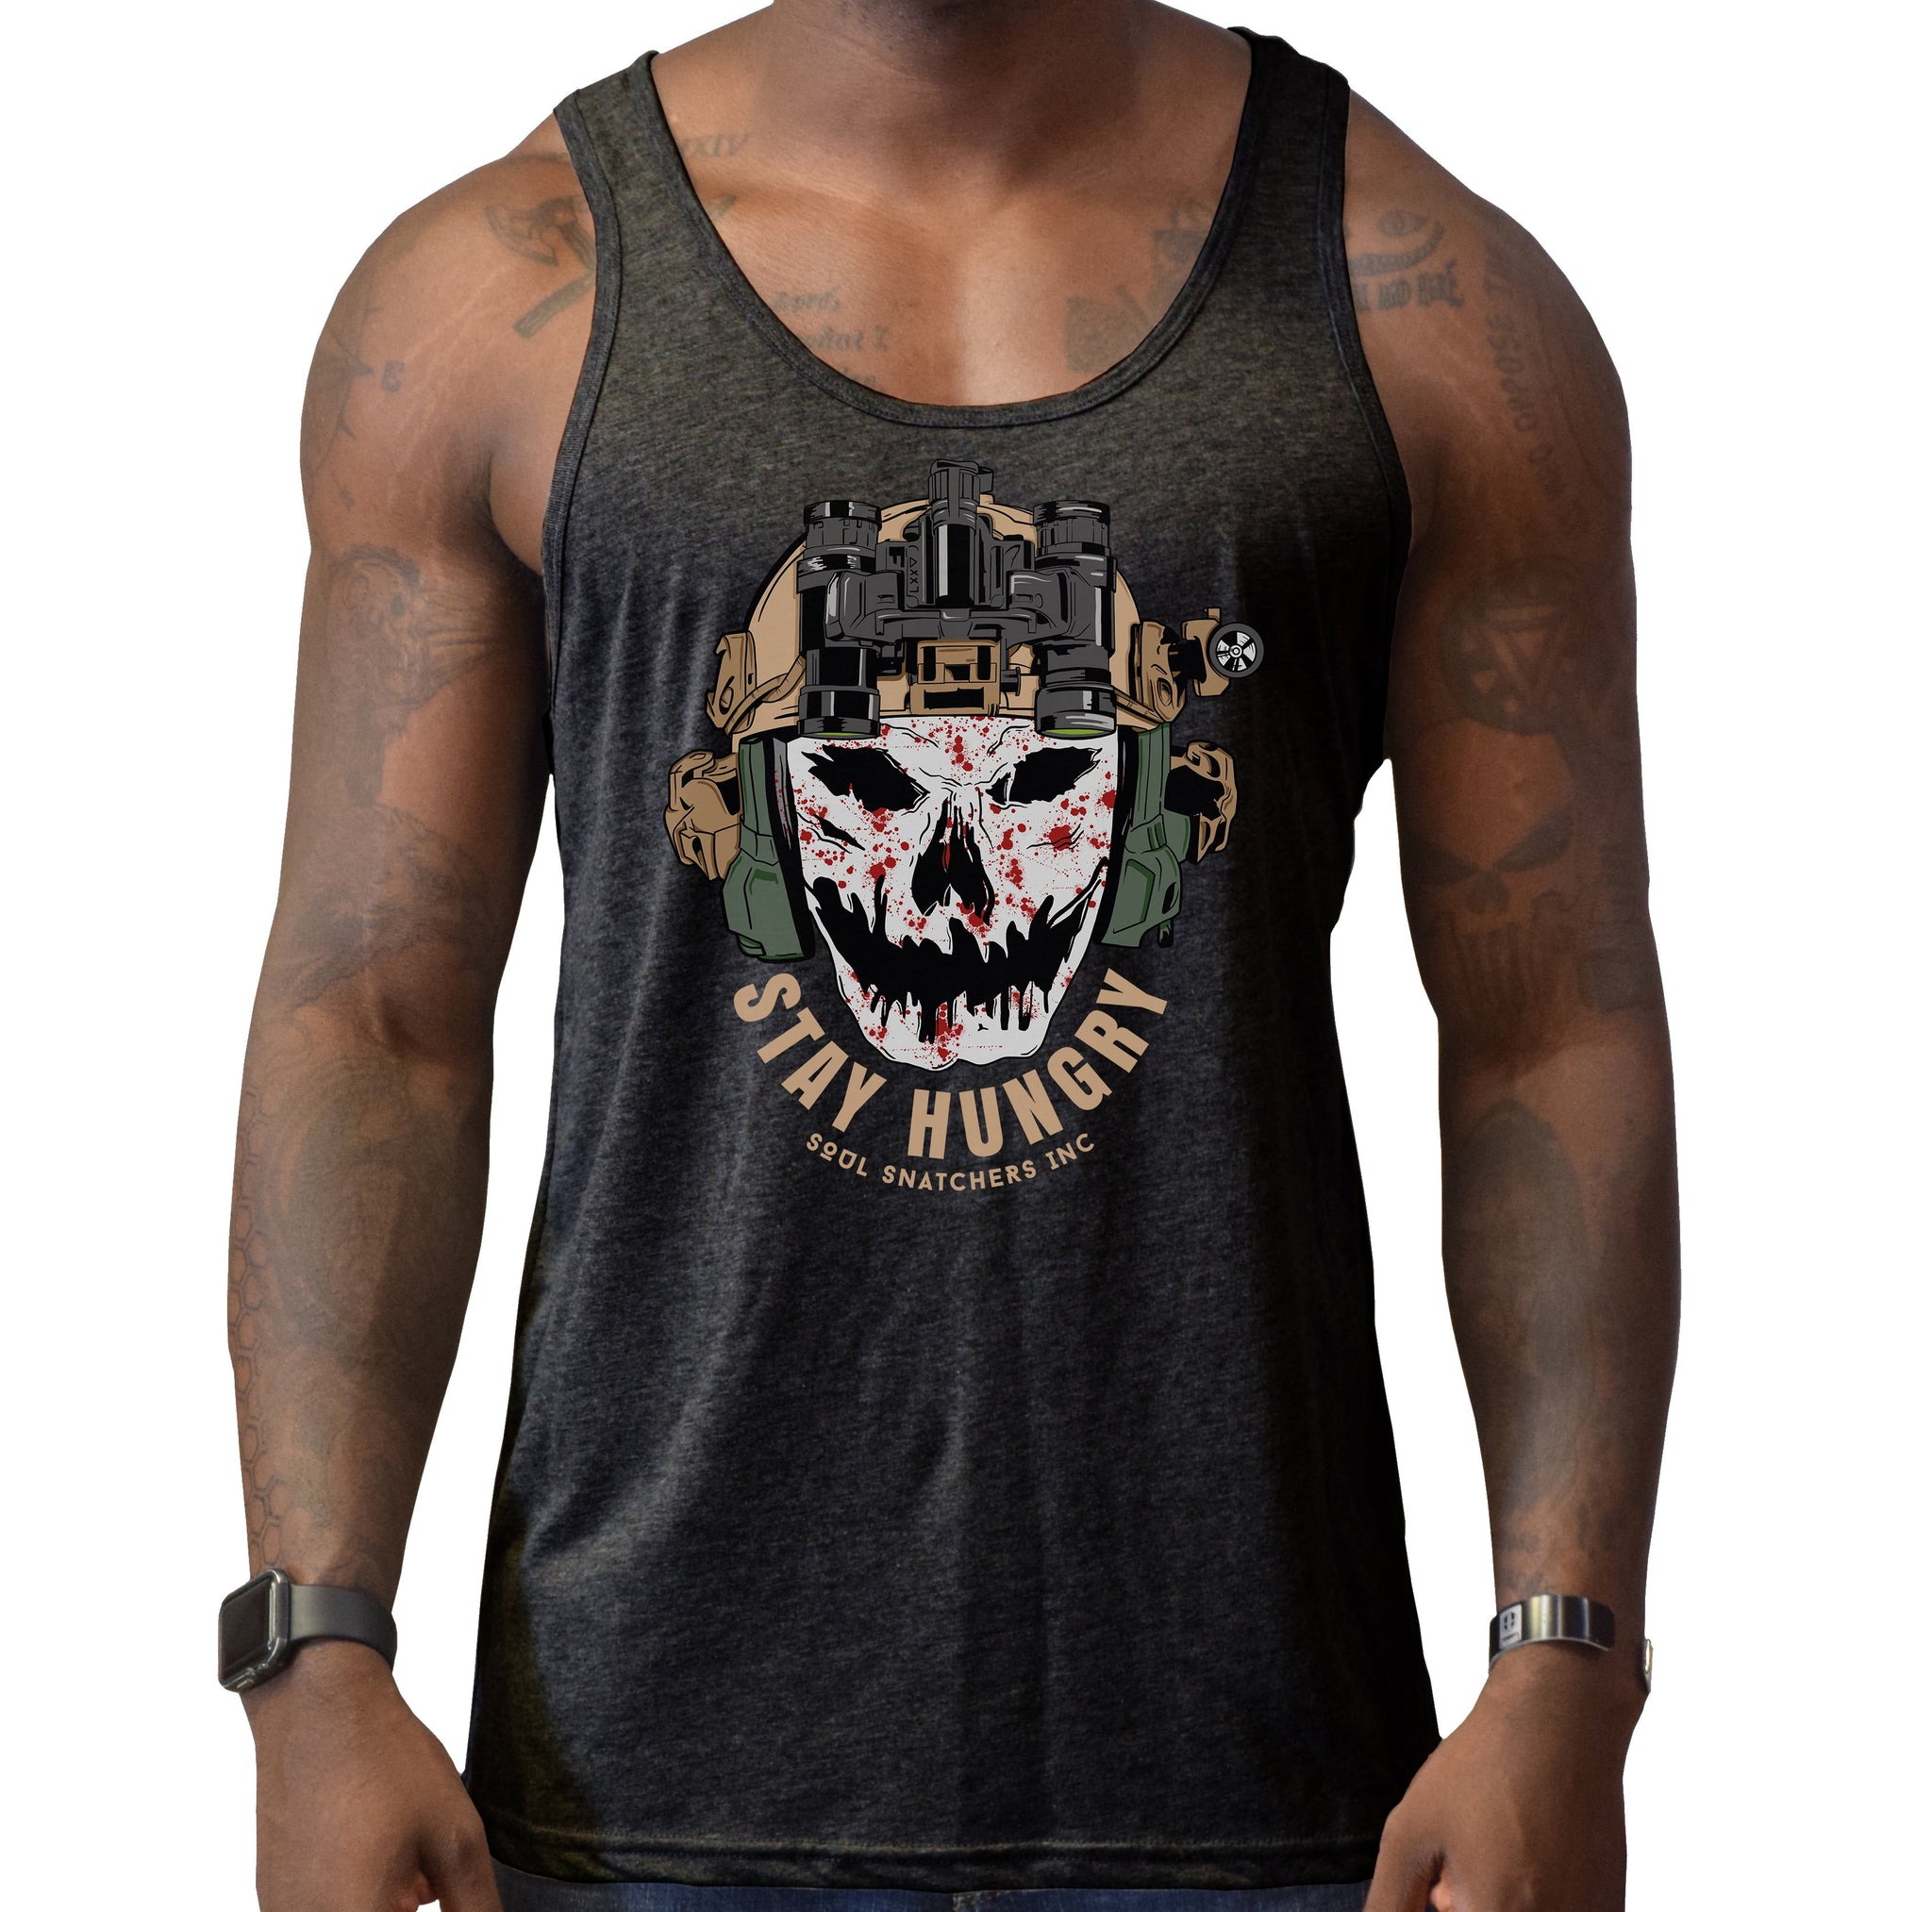 Stay Hungry Men's Tank